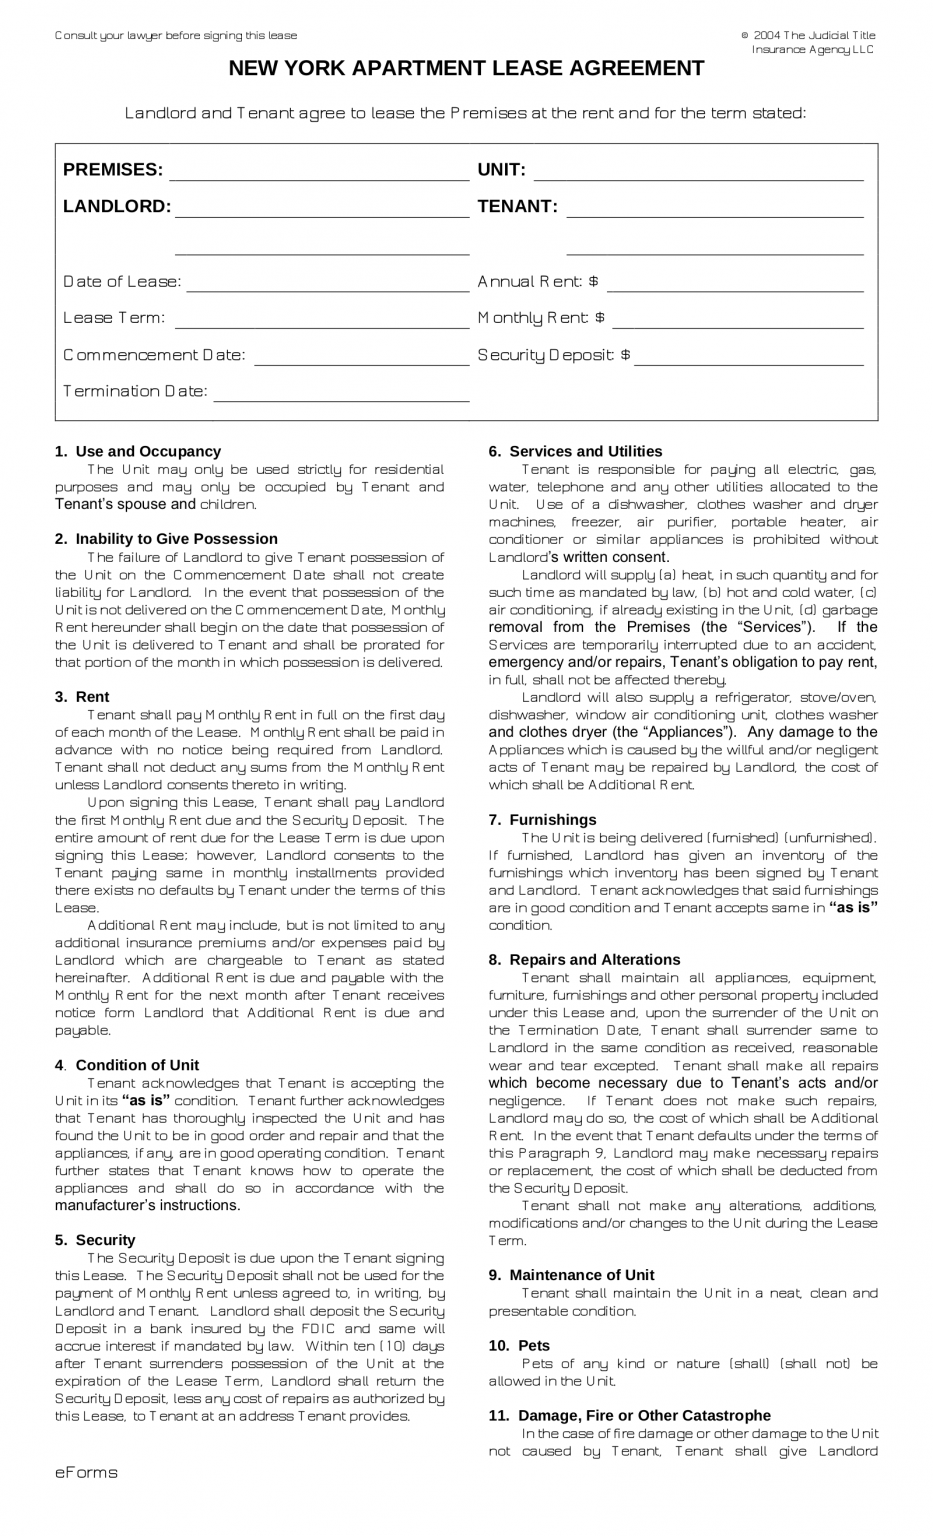 free-new-york-standard-apartment-lease-agreement-form-word-pdf-eforms